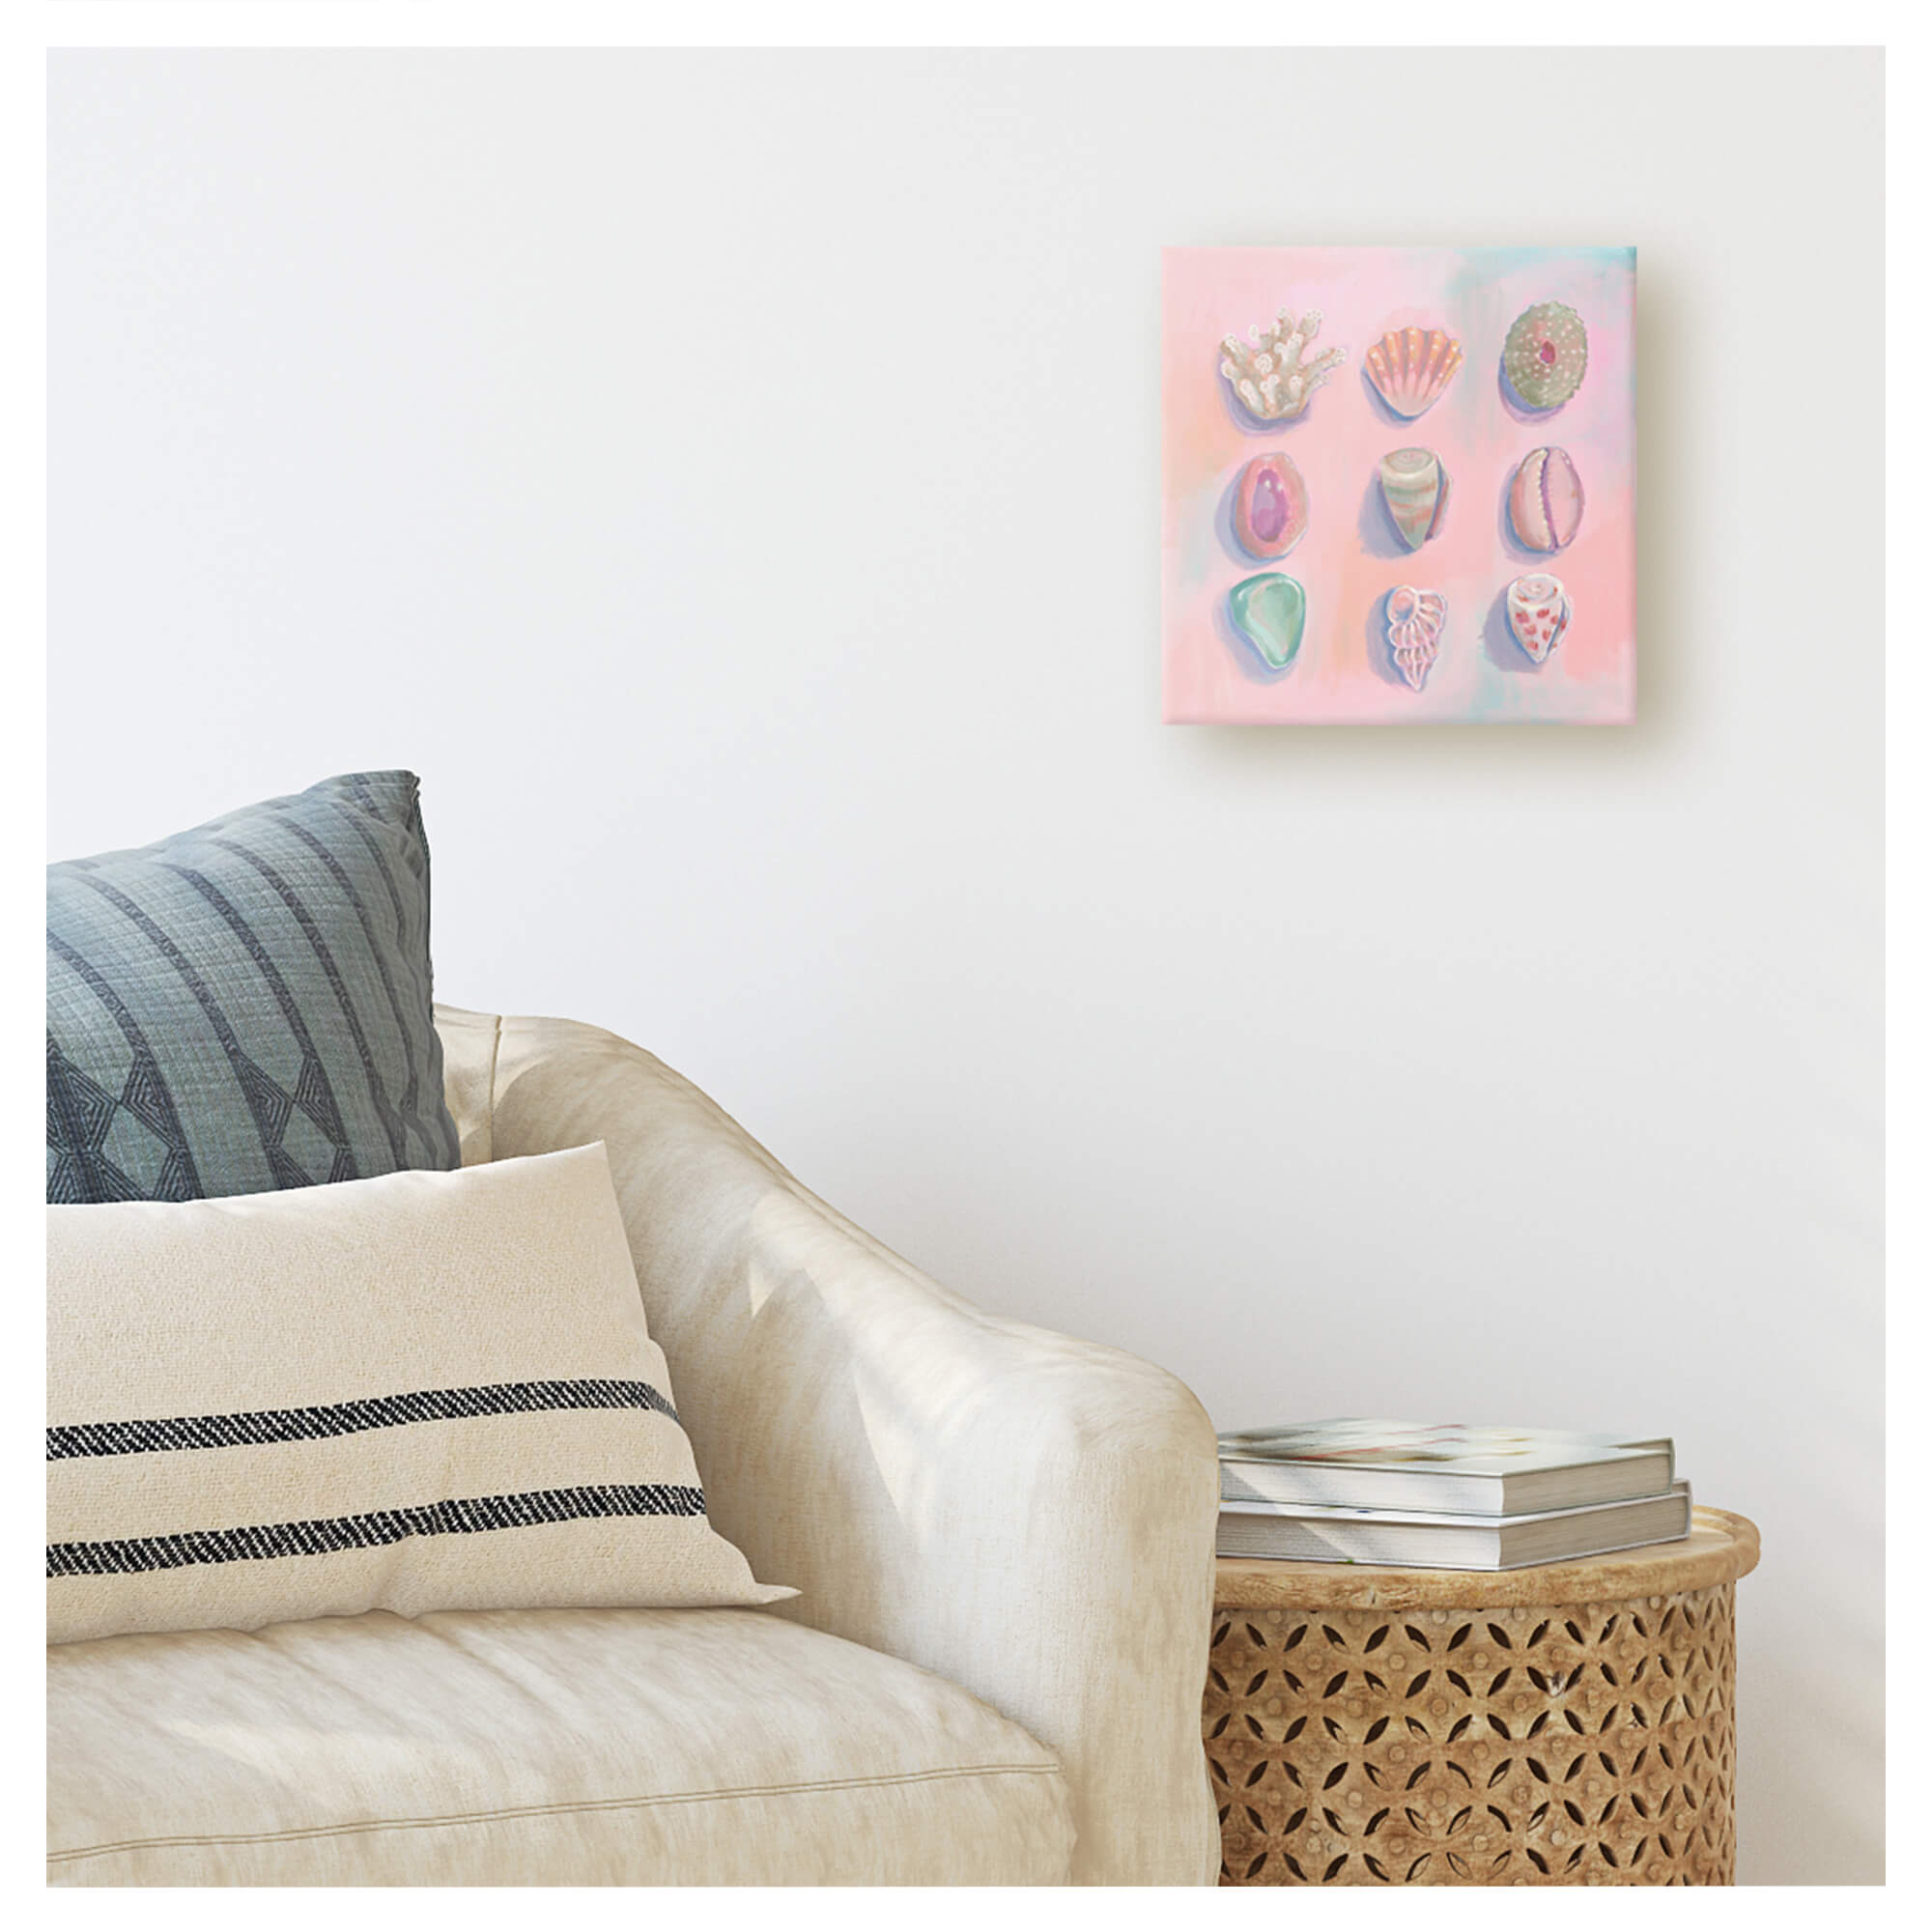 A painting on canvas depicting seashells with light pink background by Hawaii artist Lindsay Wilkins